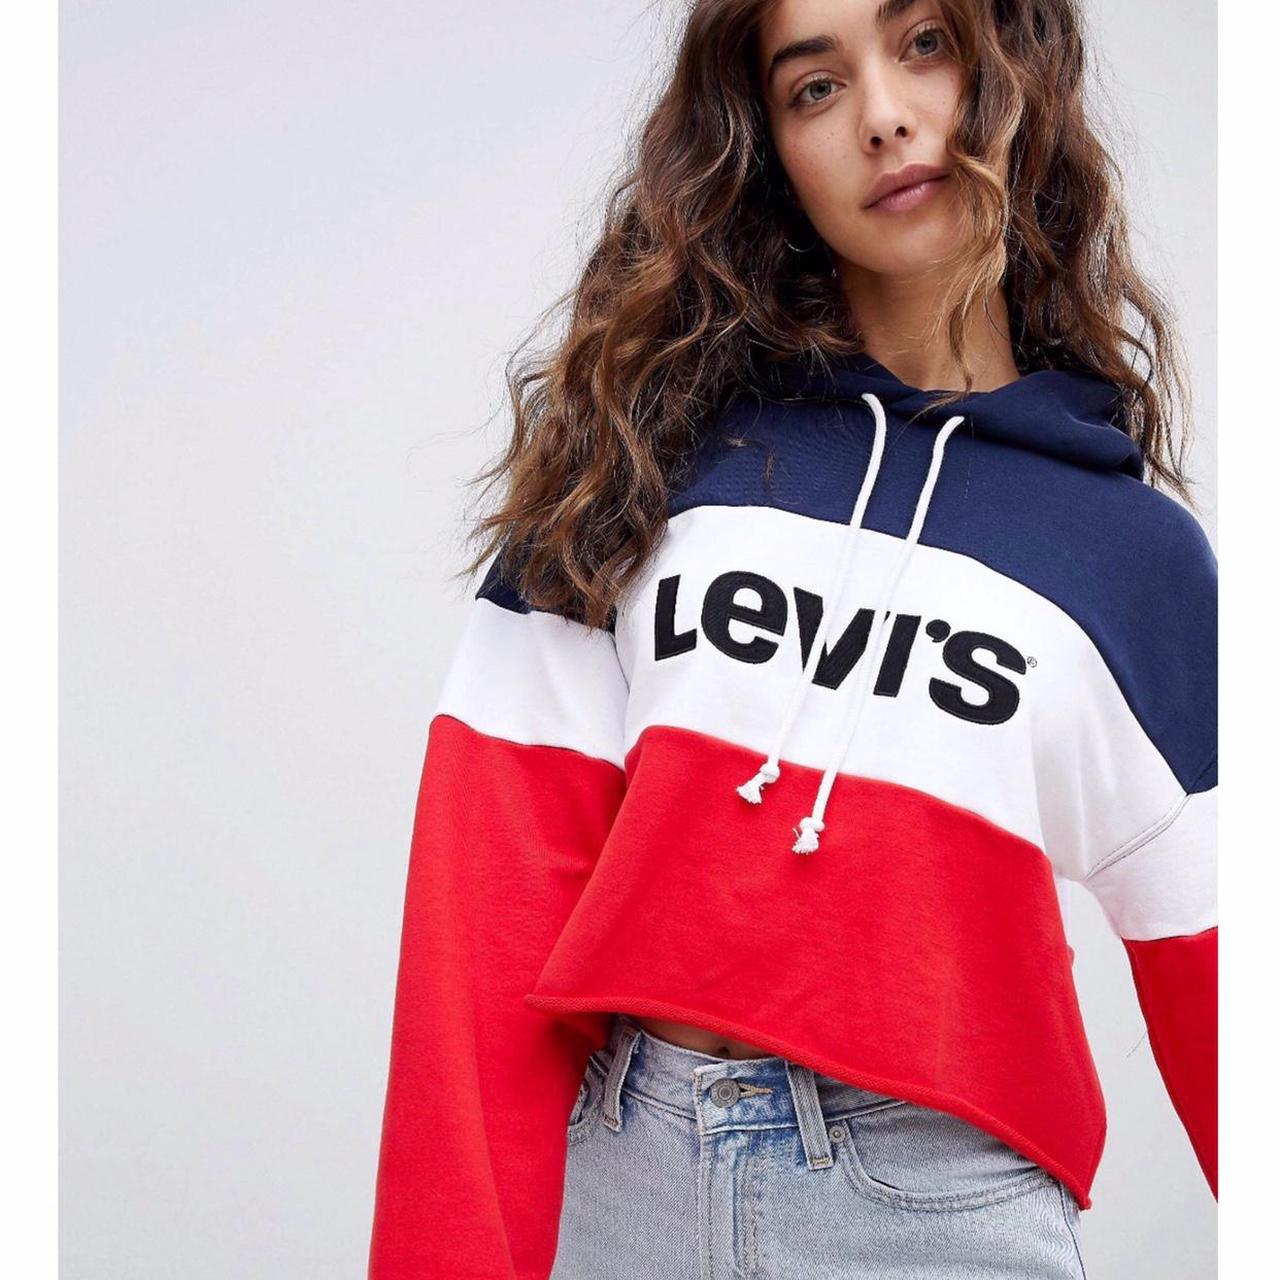 Levi's Women's Blue and Red Hoodie | Depop